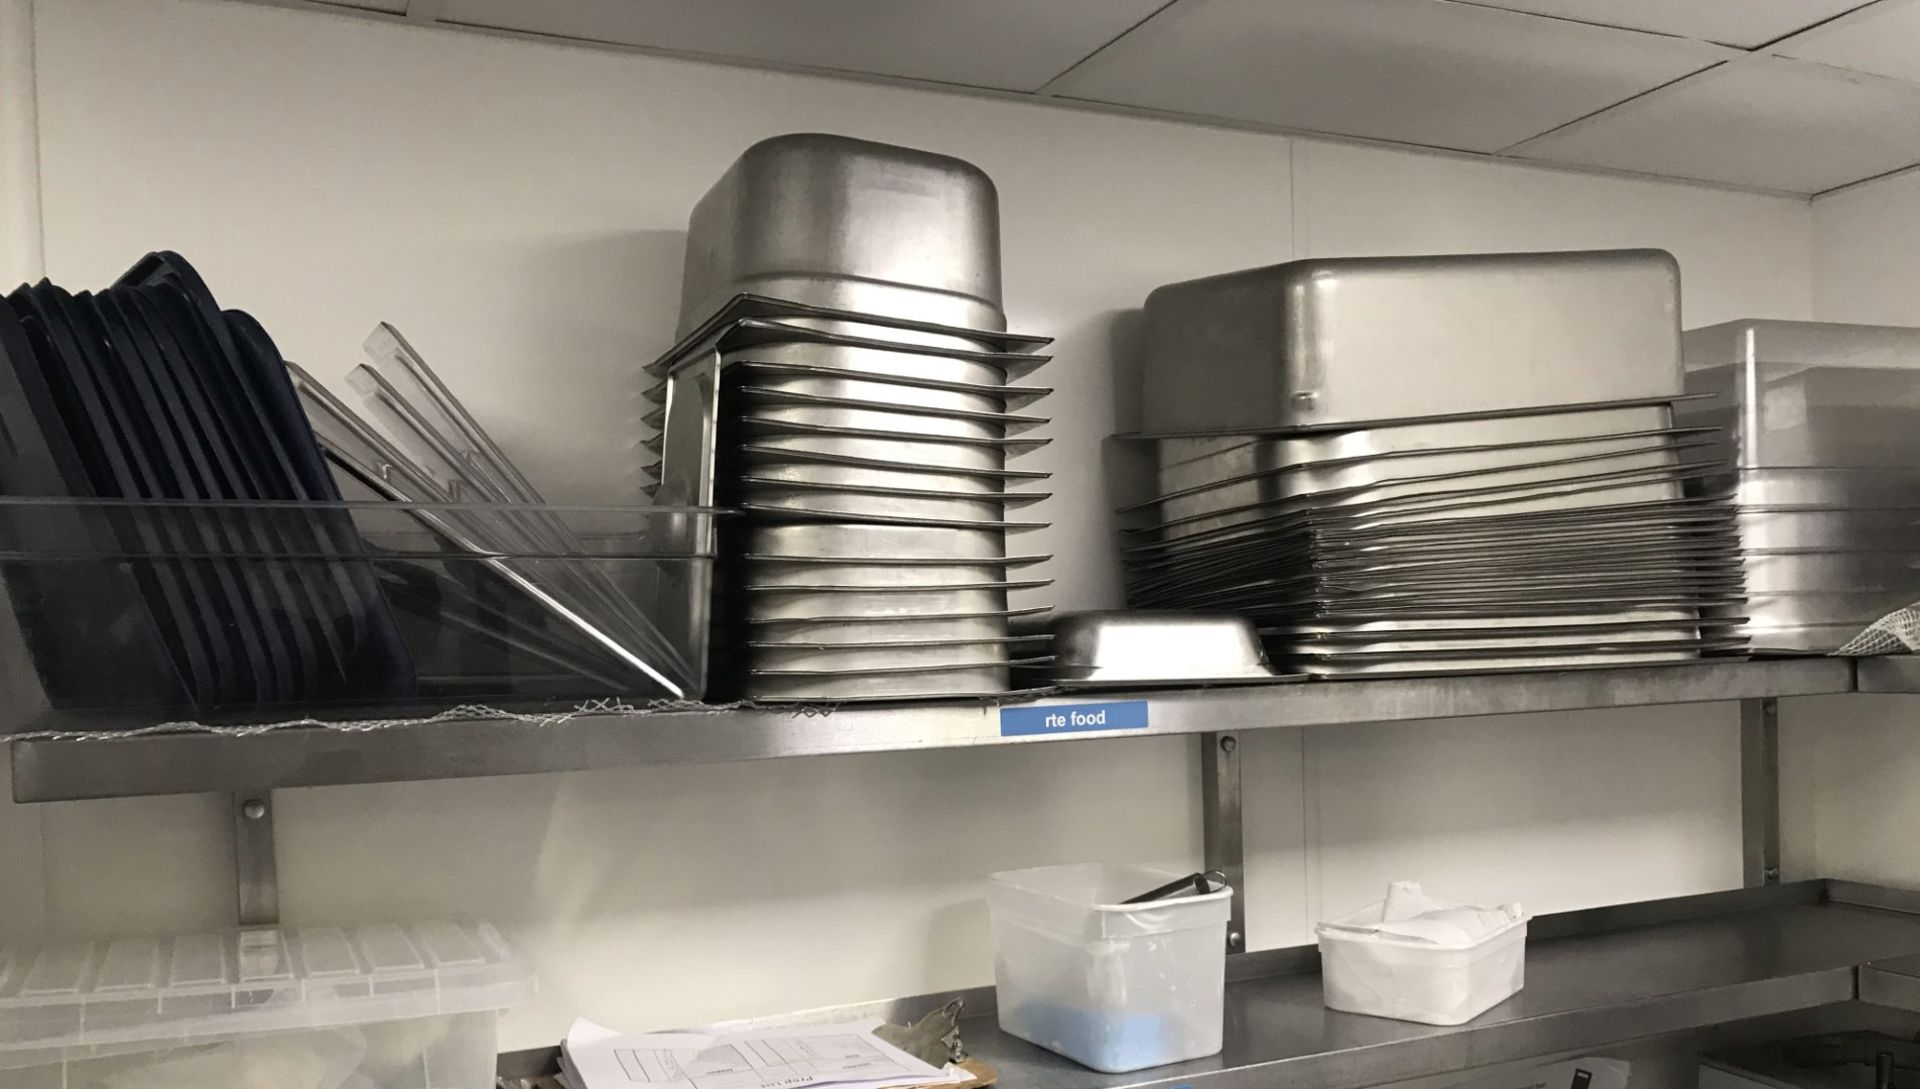 4 x Wall Mounted Stainless Steel Wall Shelves Plus Large Collection of Gastro Pans and Plastic